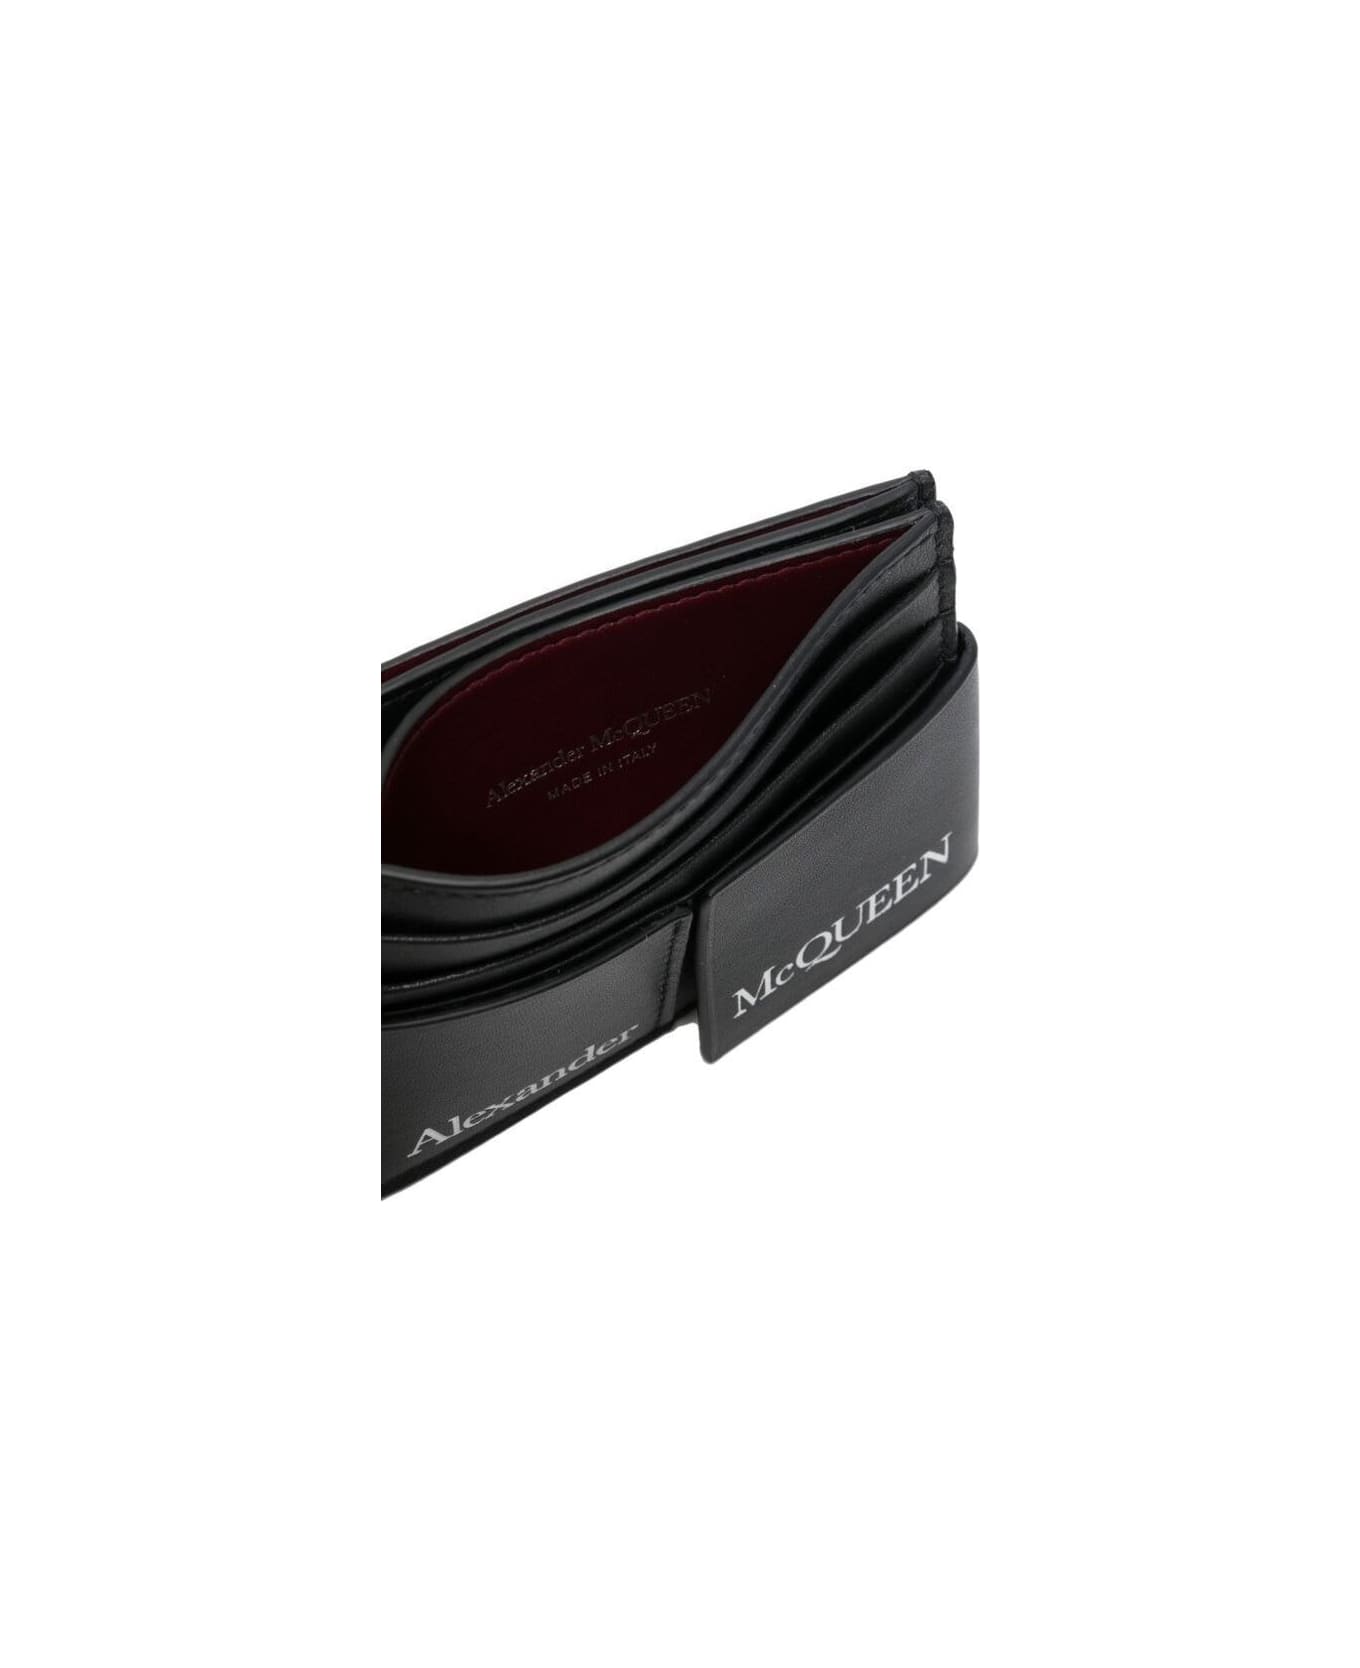 Alexander McQueen Black Double Card-holder With Contrasting Lettering In Leather Man Alexander Mcqueen - Black 財布